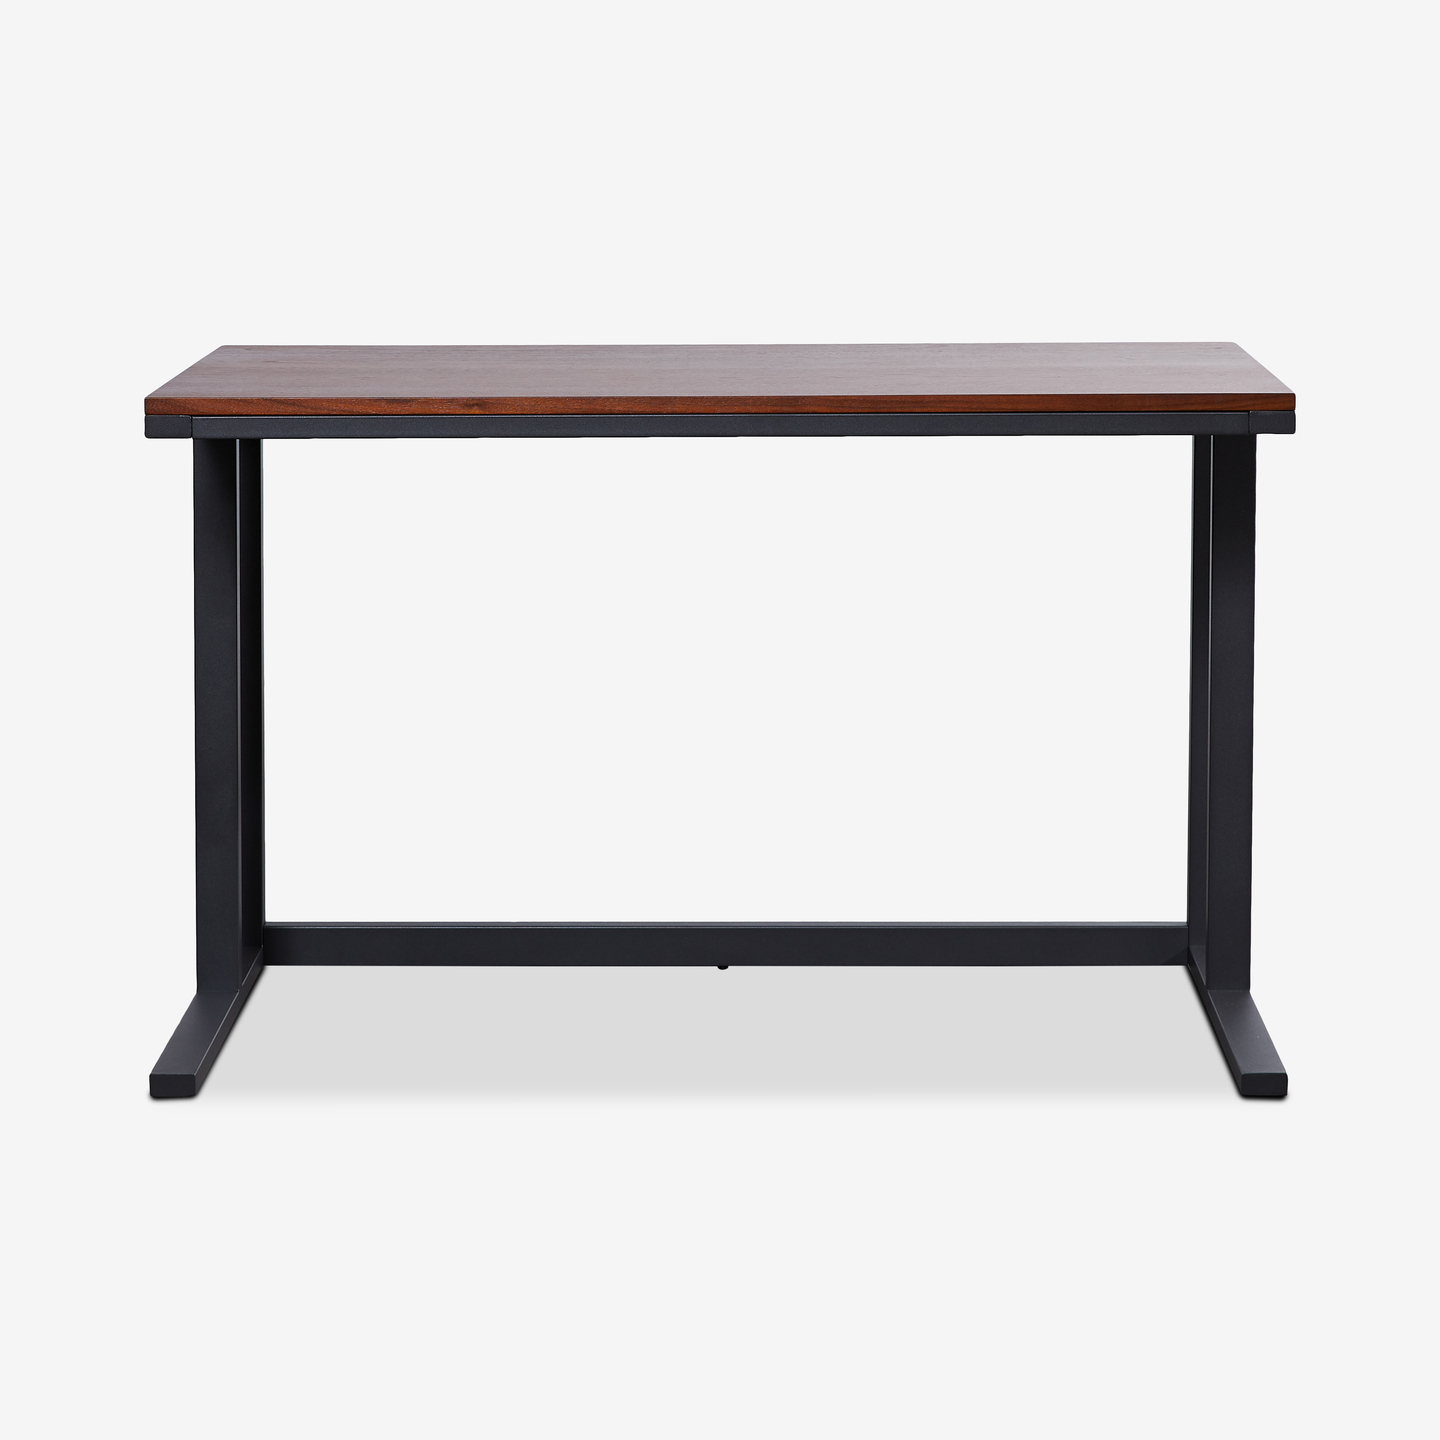 496_Pilson-Graphite-Desk-with-Walnut-Top_Flat-Front 2020